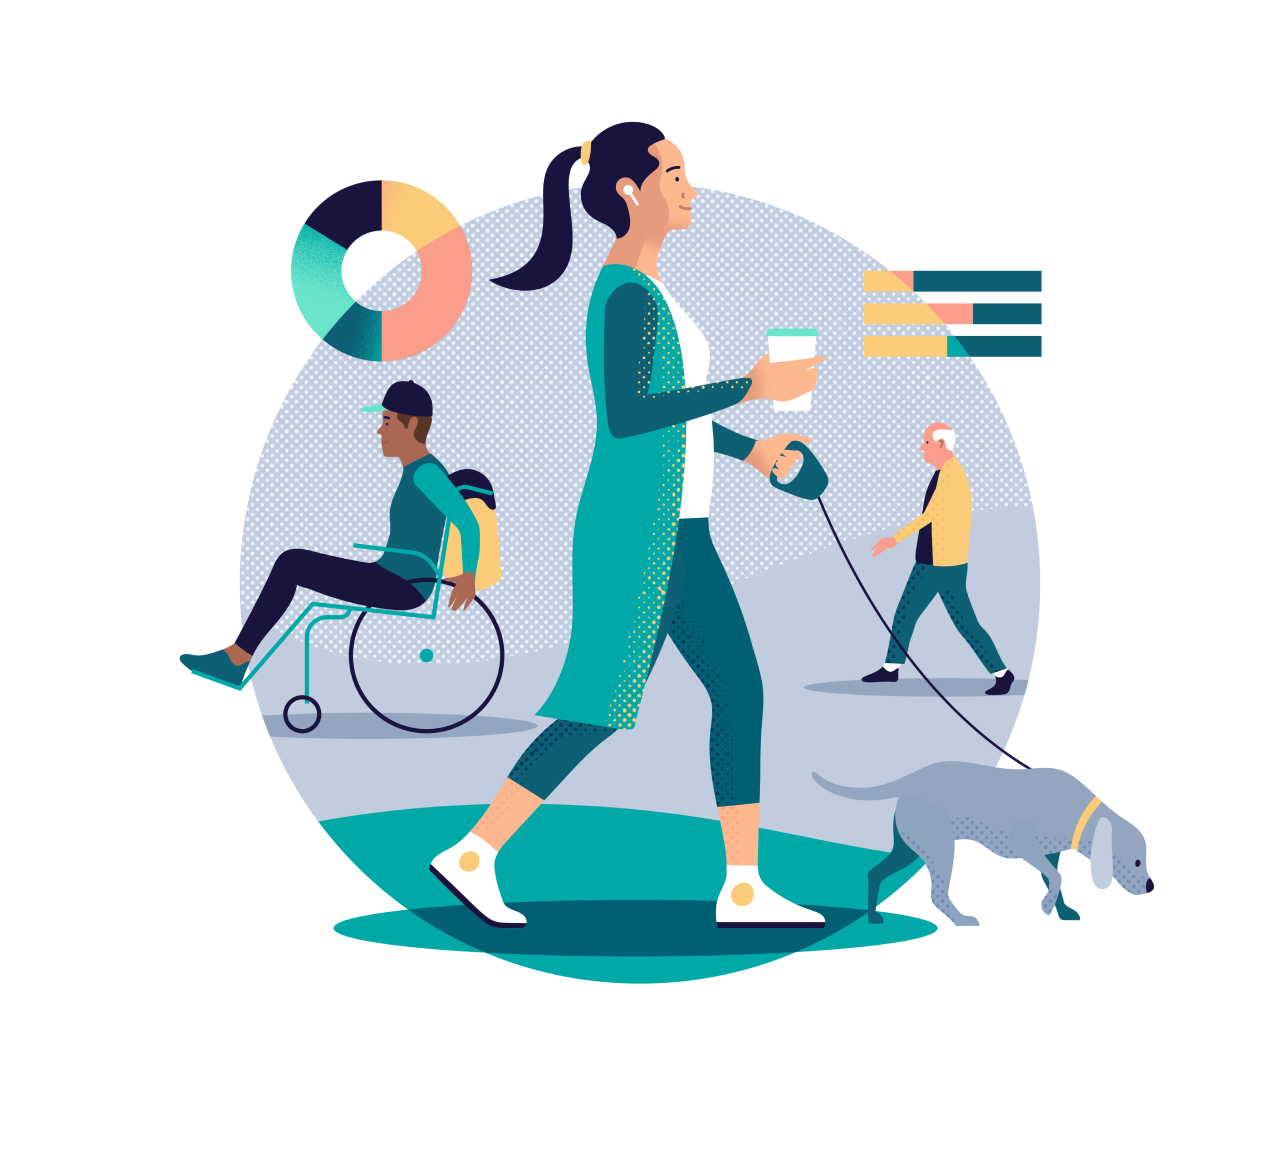 Illustration of a woman walking a dog, man in a wheel chair and elderly man walking